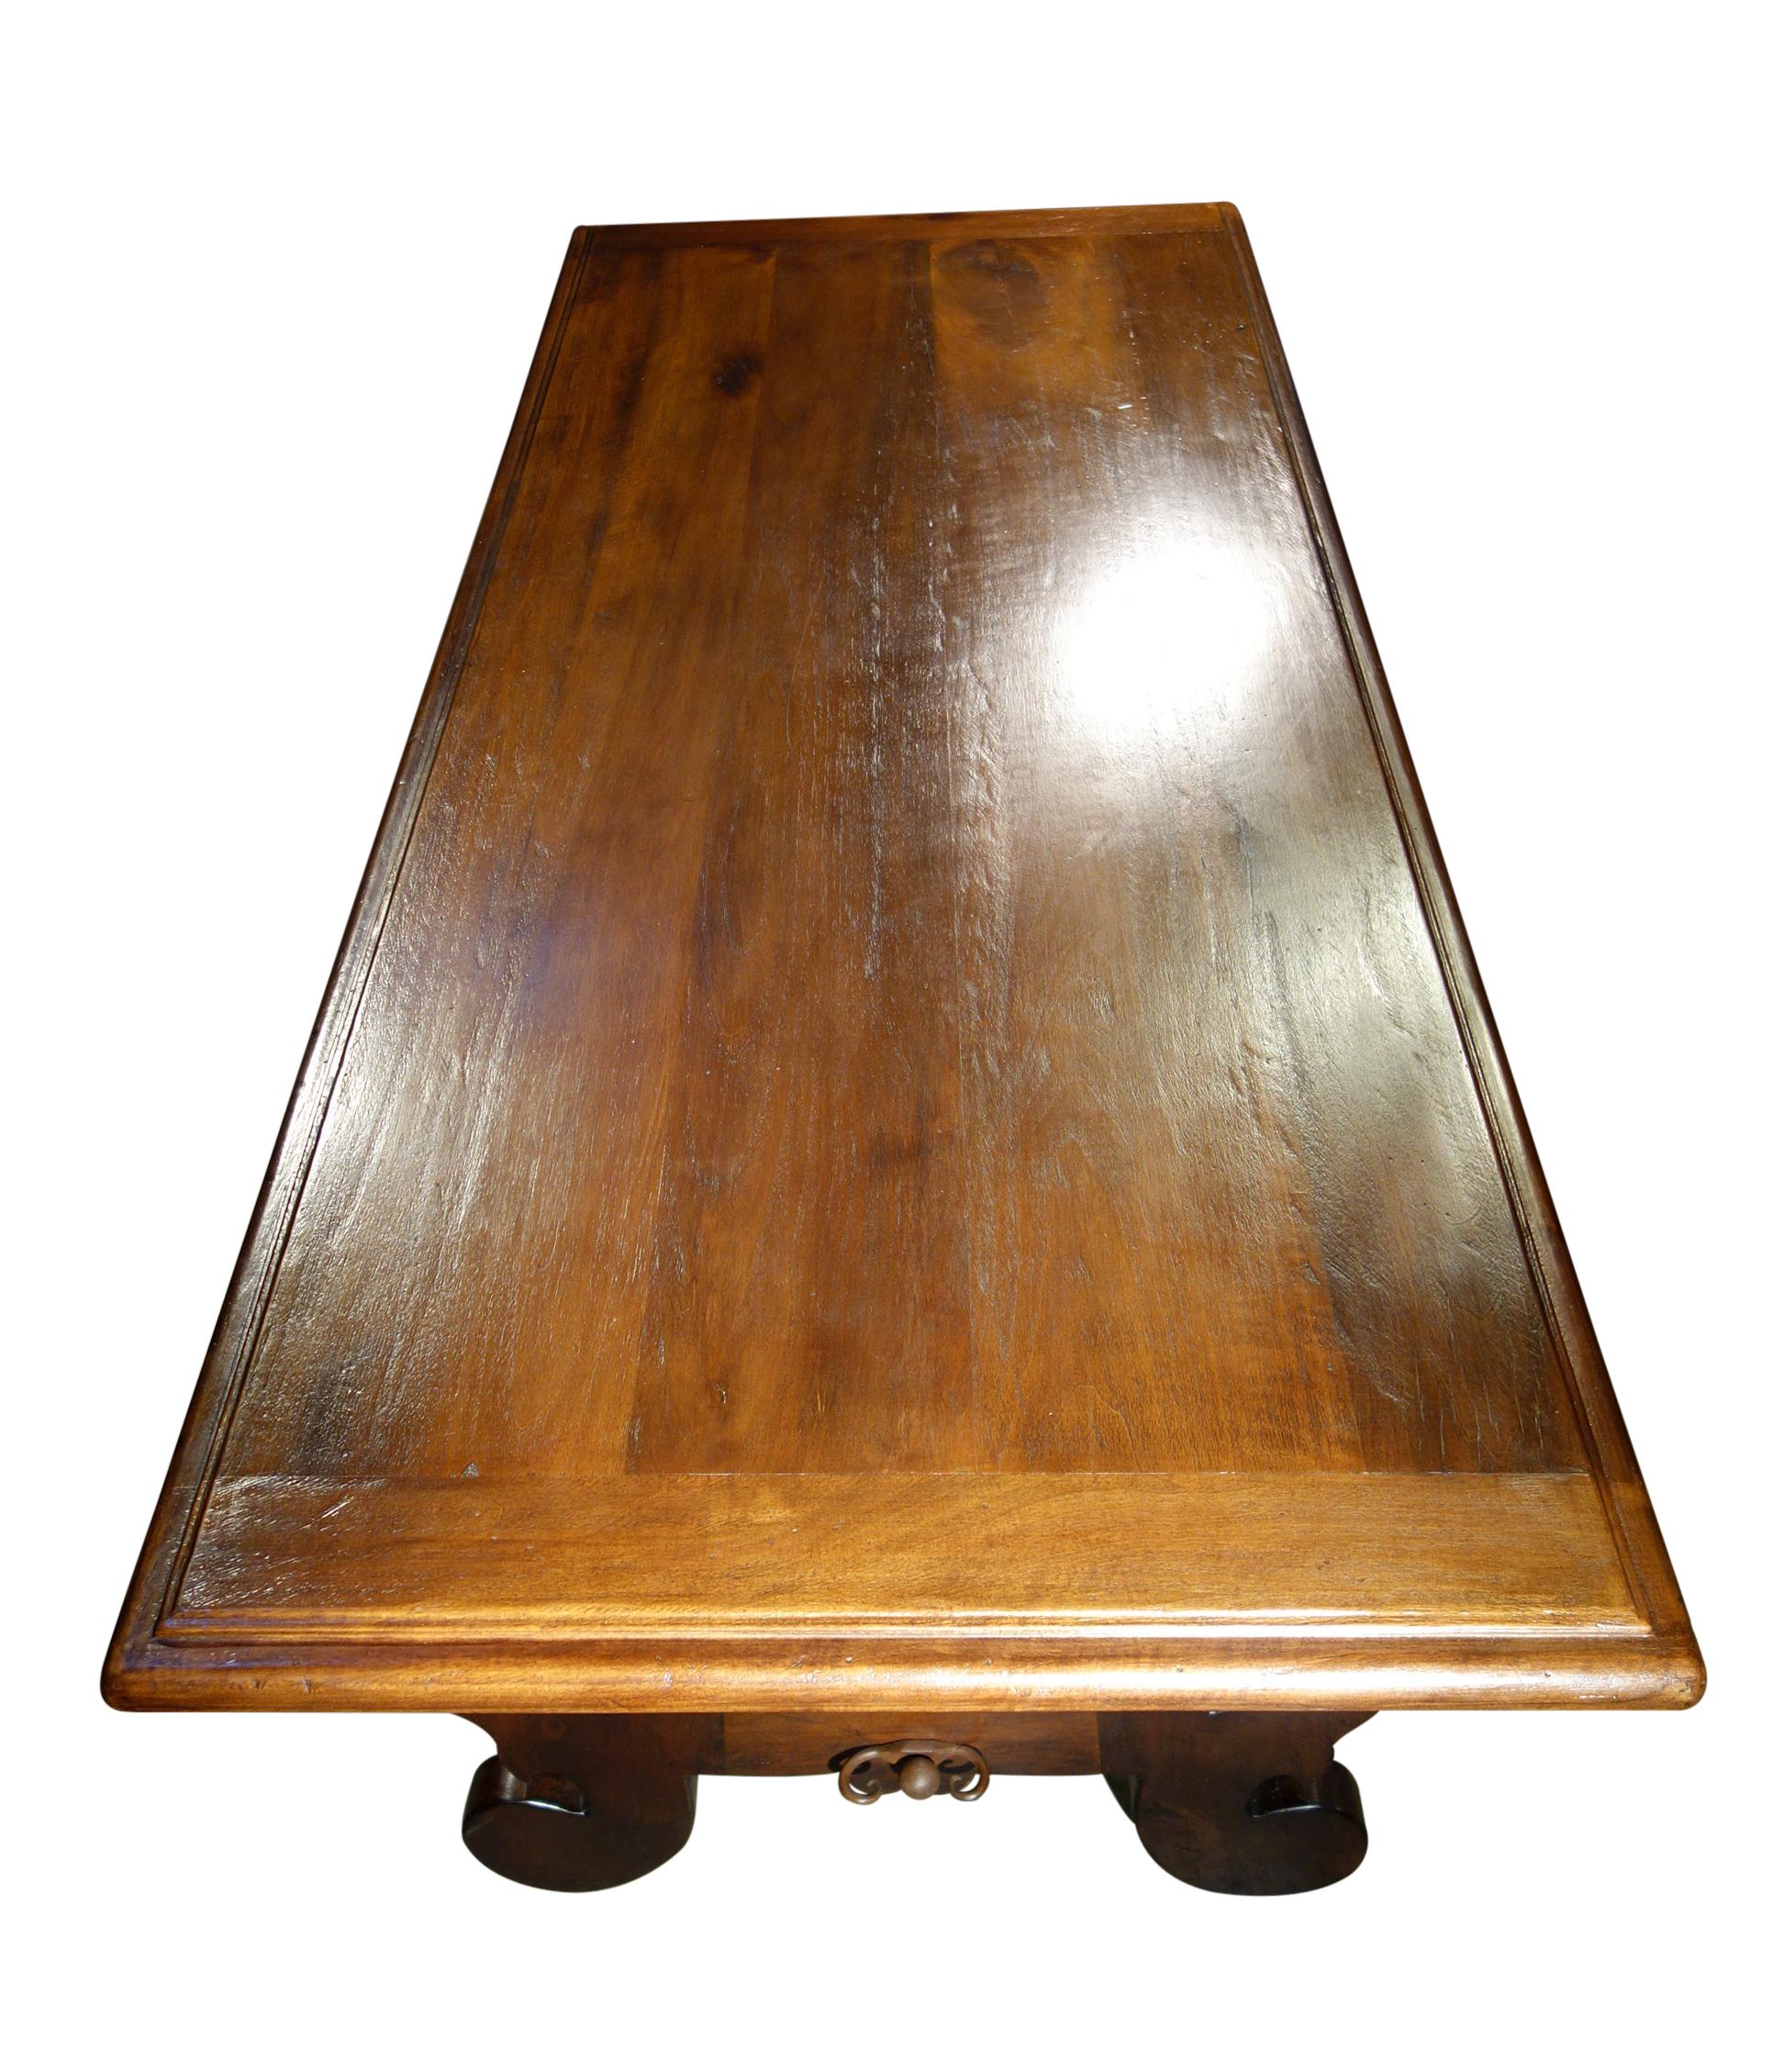 17th C Style Solid Italian Walnut Refectory Writing Dentil Edge Table options In New Condition For Sale In Encinitas, CA